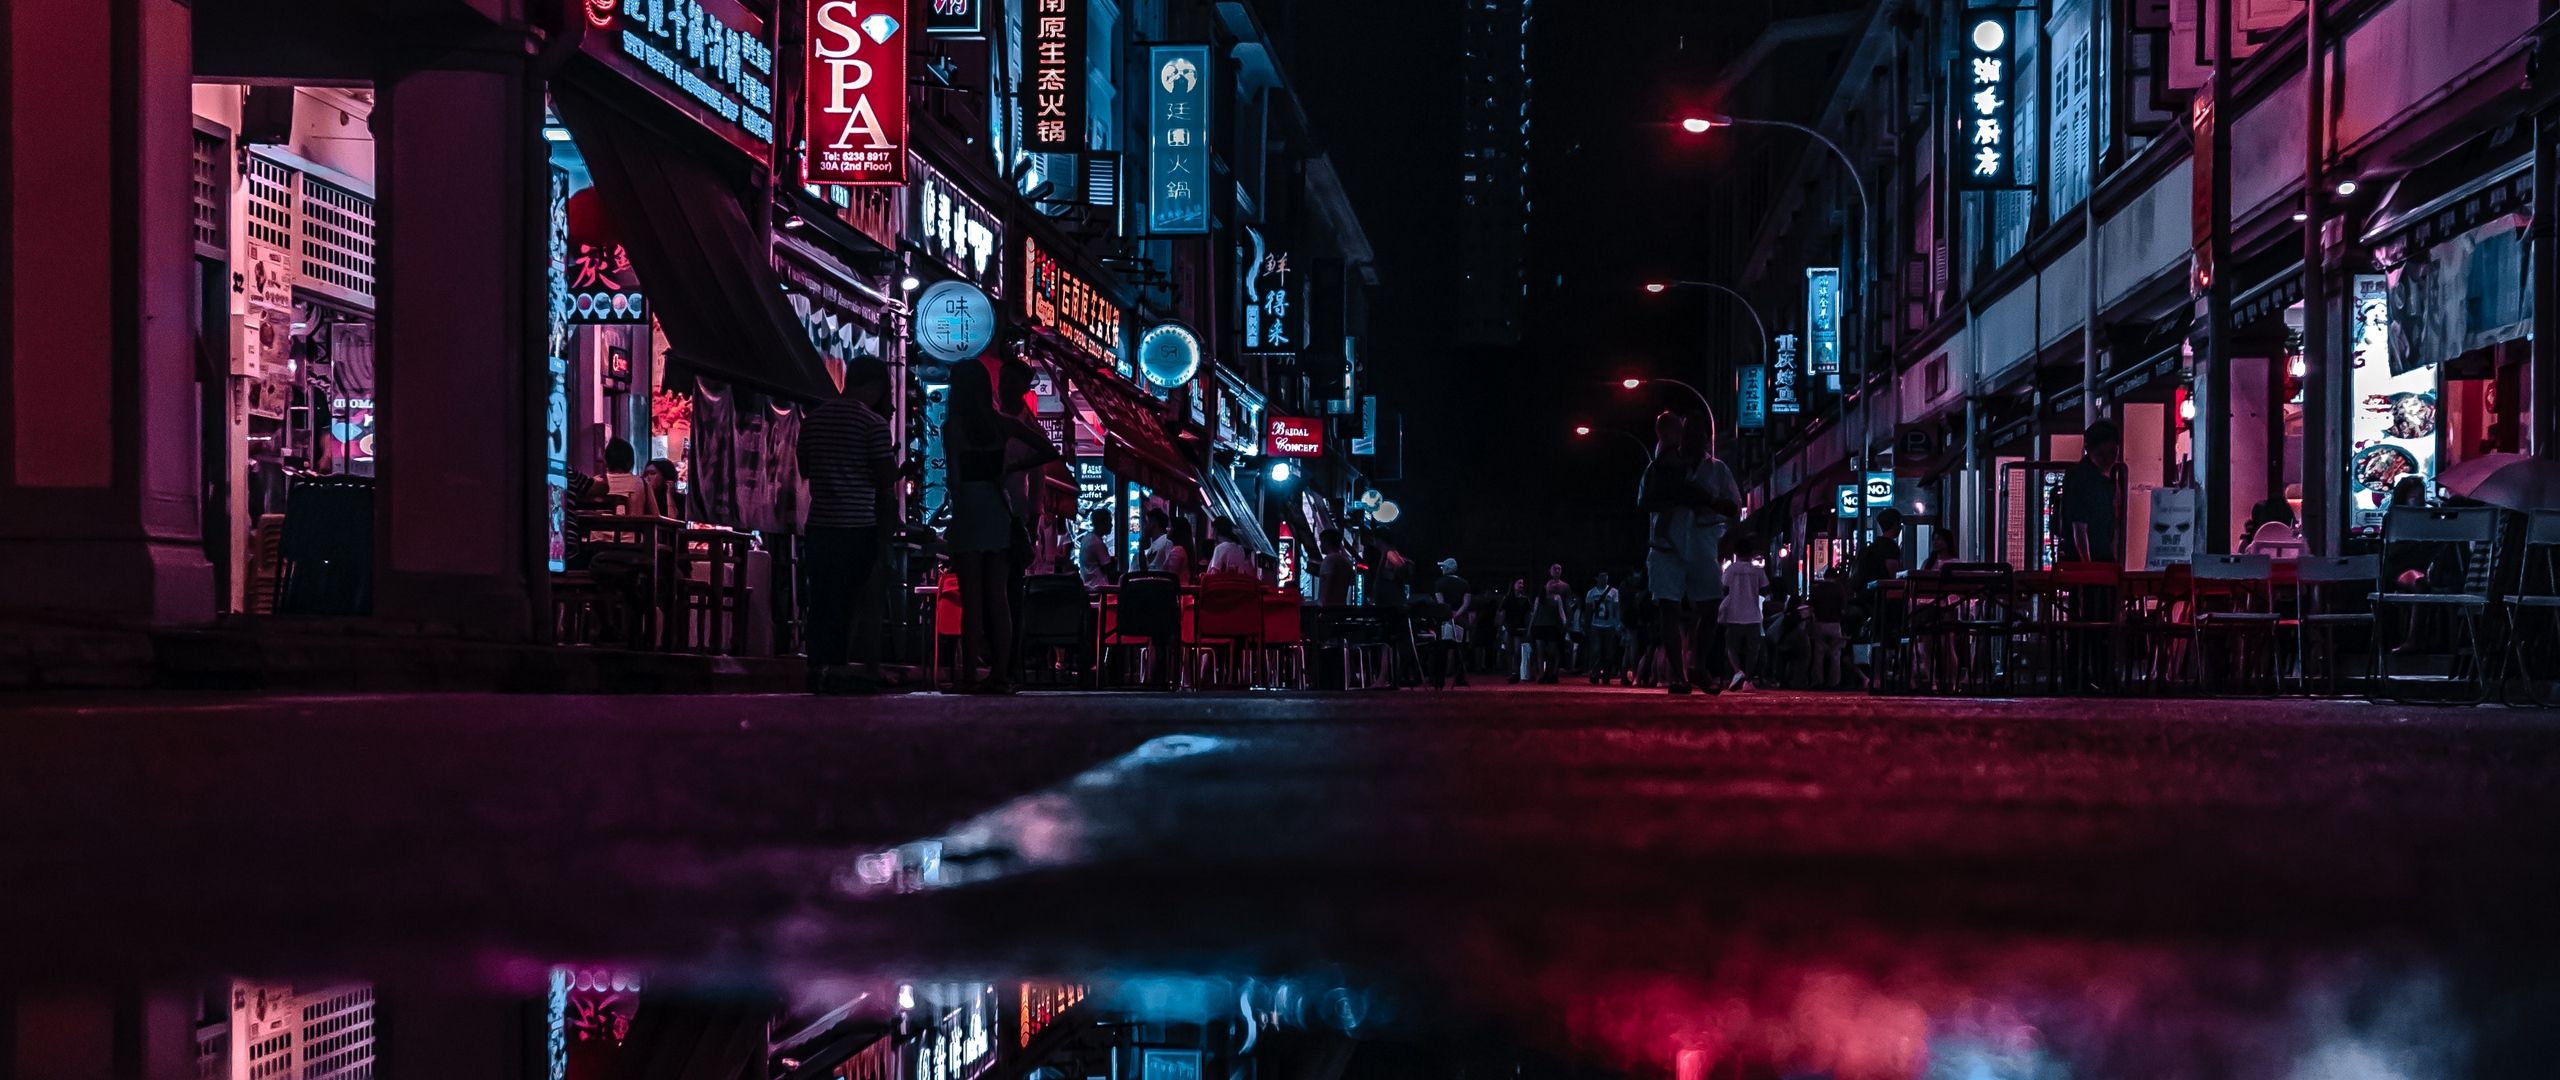 Download Bright lights and urban vibes in Neon City Wallpaper  Wallpapers com